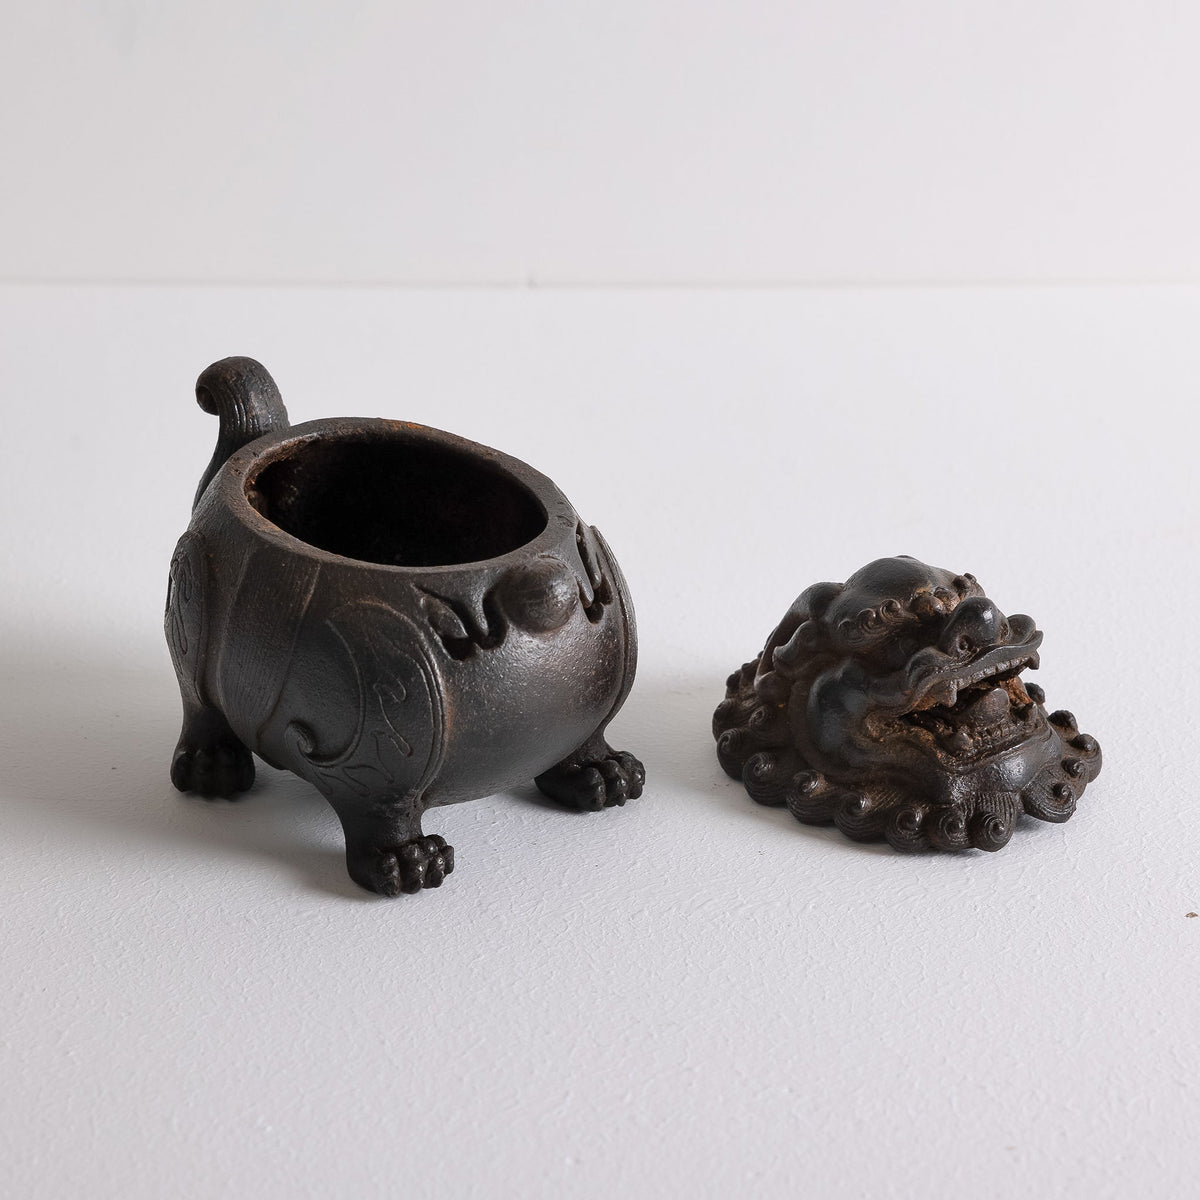 Lid and body of Chinese suanni lion incense burner by Kin Objects